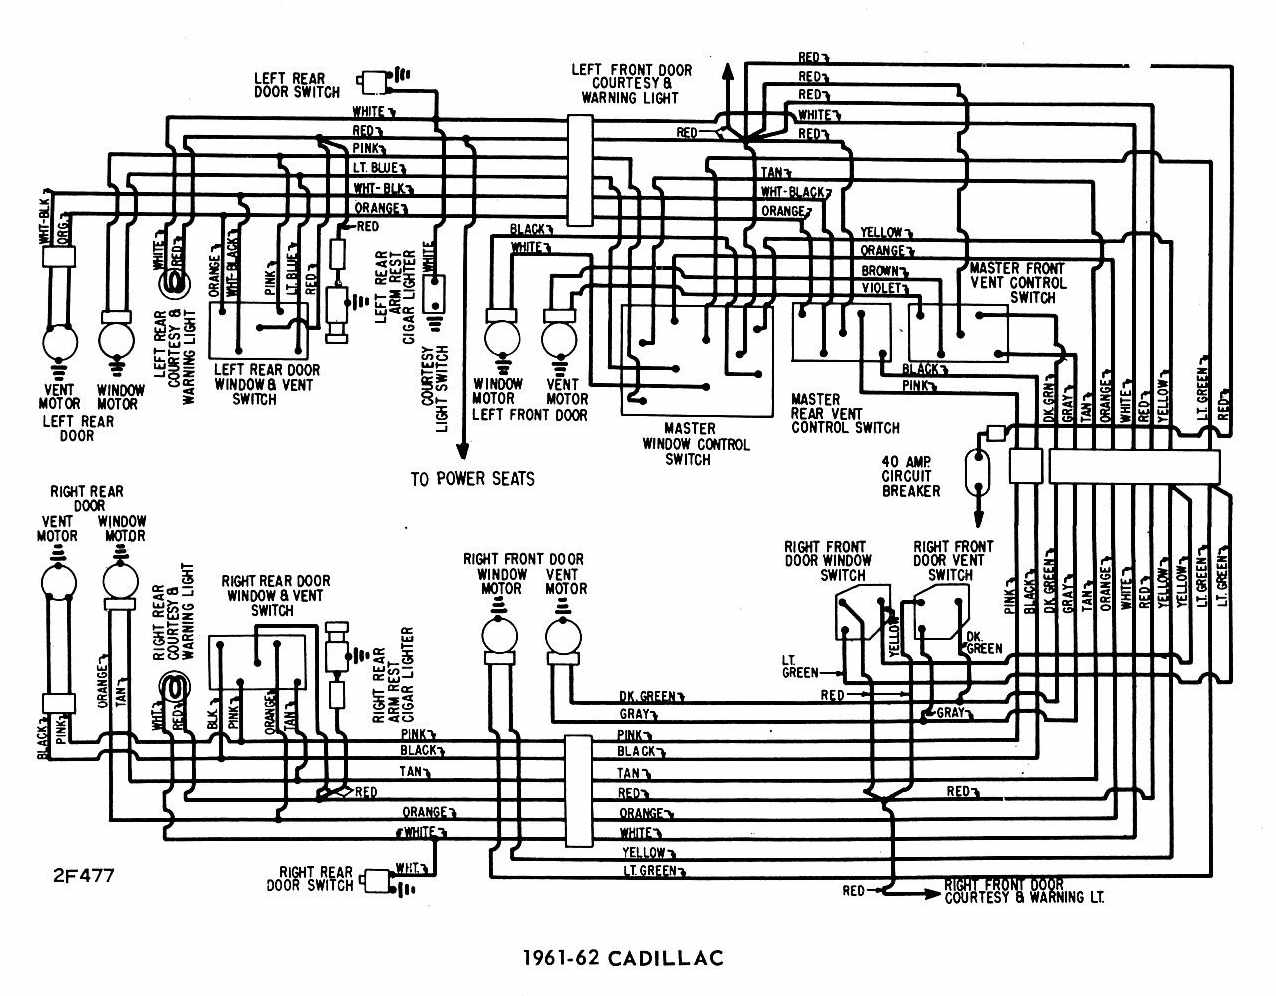 CADILLAC - Car PDF Manual, Wiring Diagram & Fault Codes DTC Chevy Tahoe Wiring Diagram automotive-manuals.net